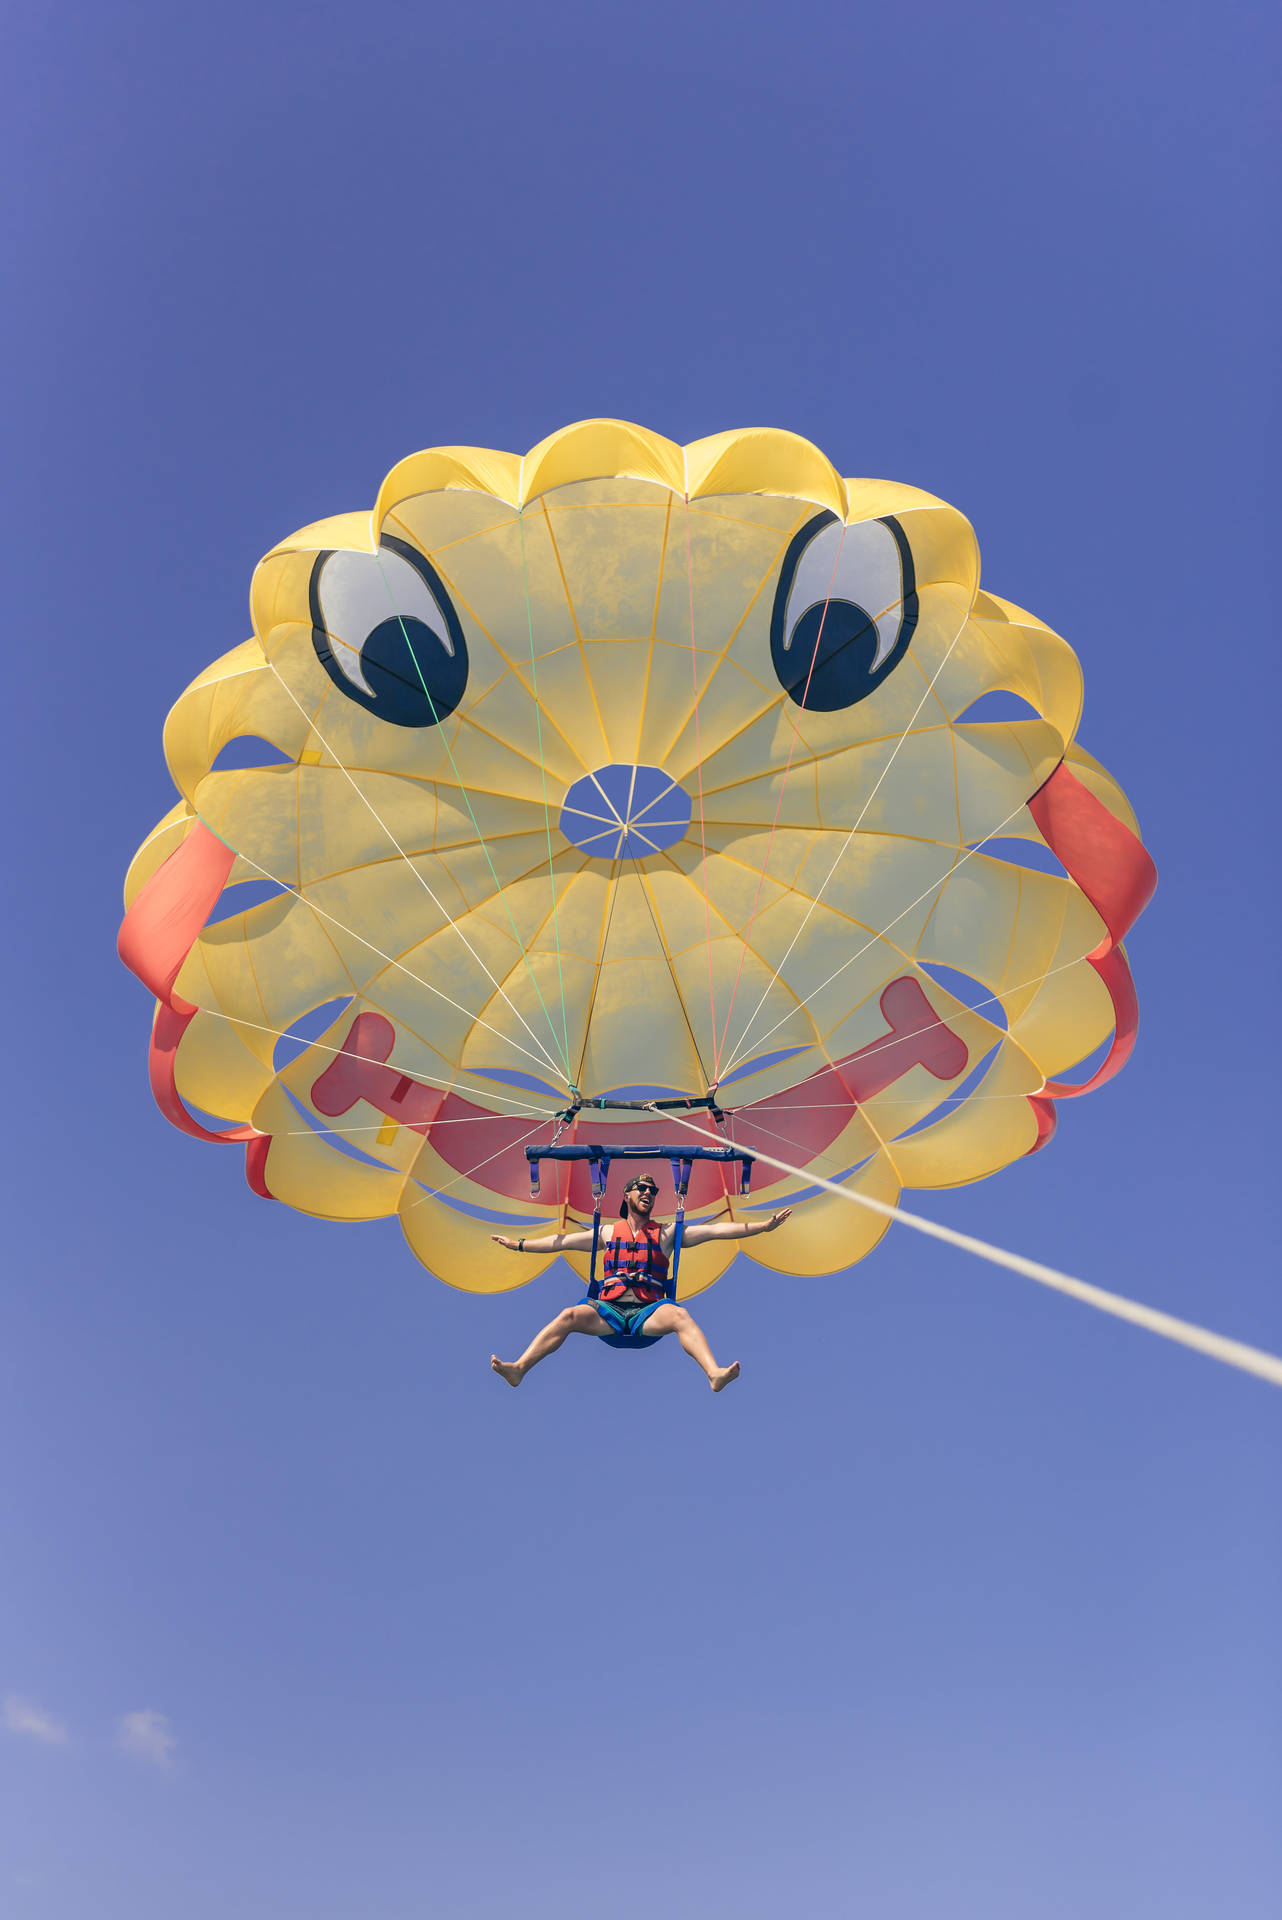 Smiley Face Chute While Parasailing Picture